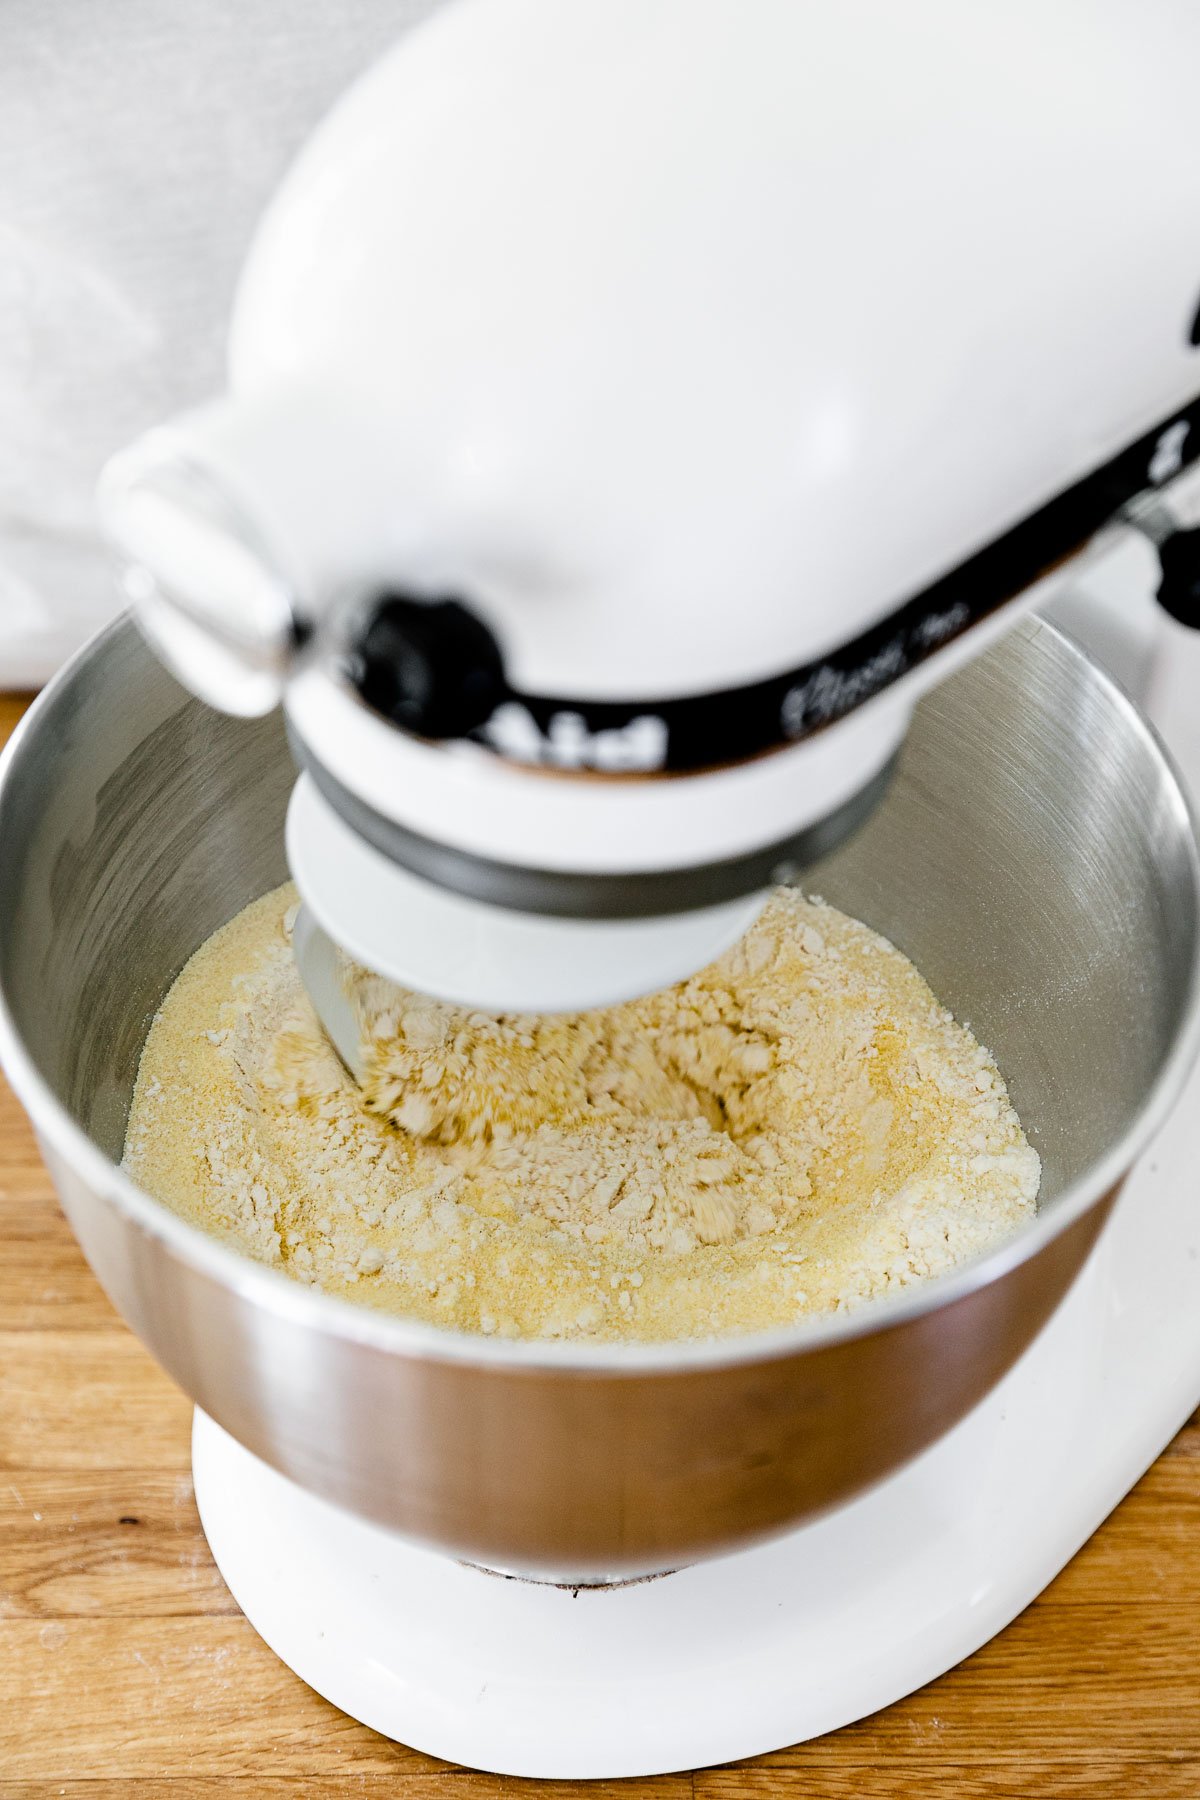 How to Make Fresh Pasta Dough with a Stand Mixer, Step 2: Mix the pasta dough. A KitchenAid Stand Mixer with the paddle attachment connected is turned on and being used knead fresh pasta dough that is forming within the mixing bowl. The stand mixer rests atop a butcher block countertop.